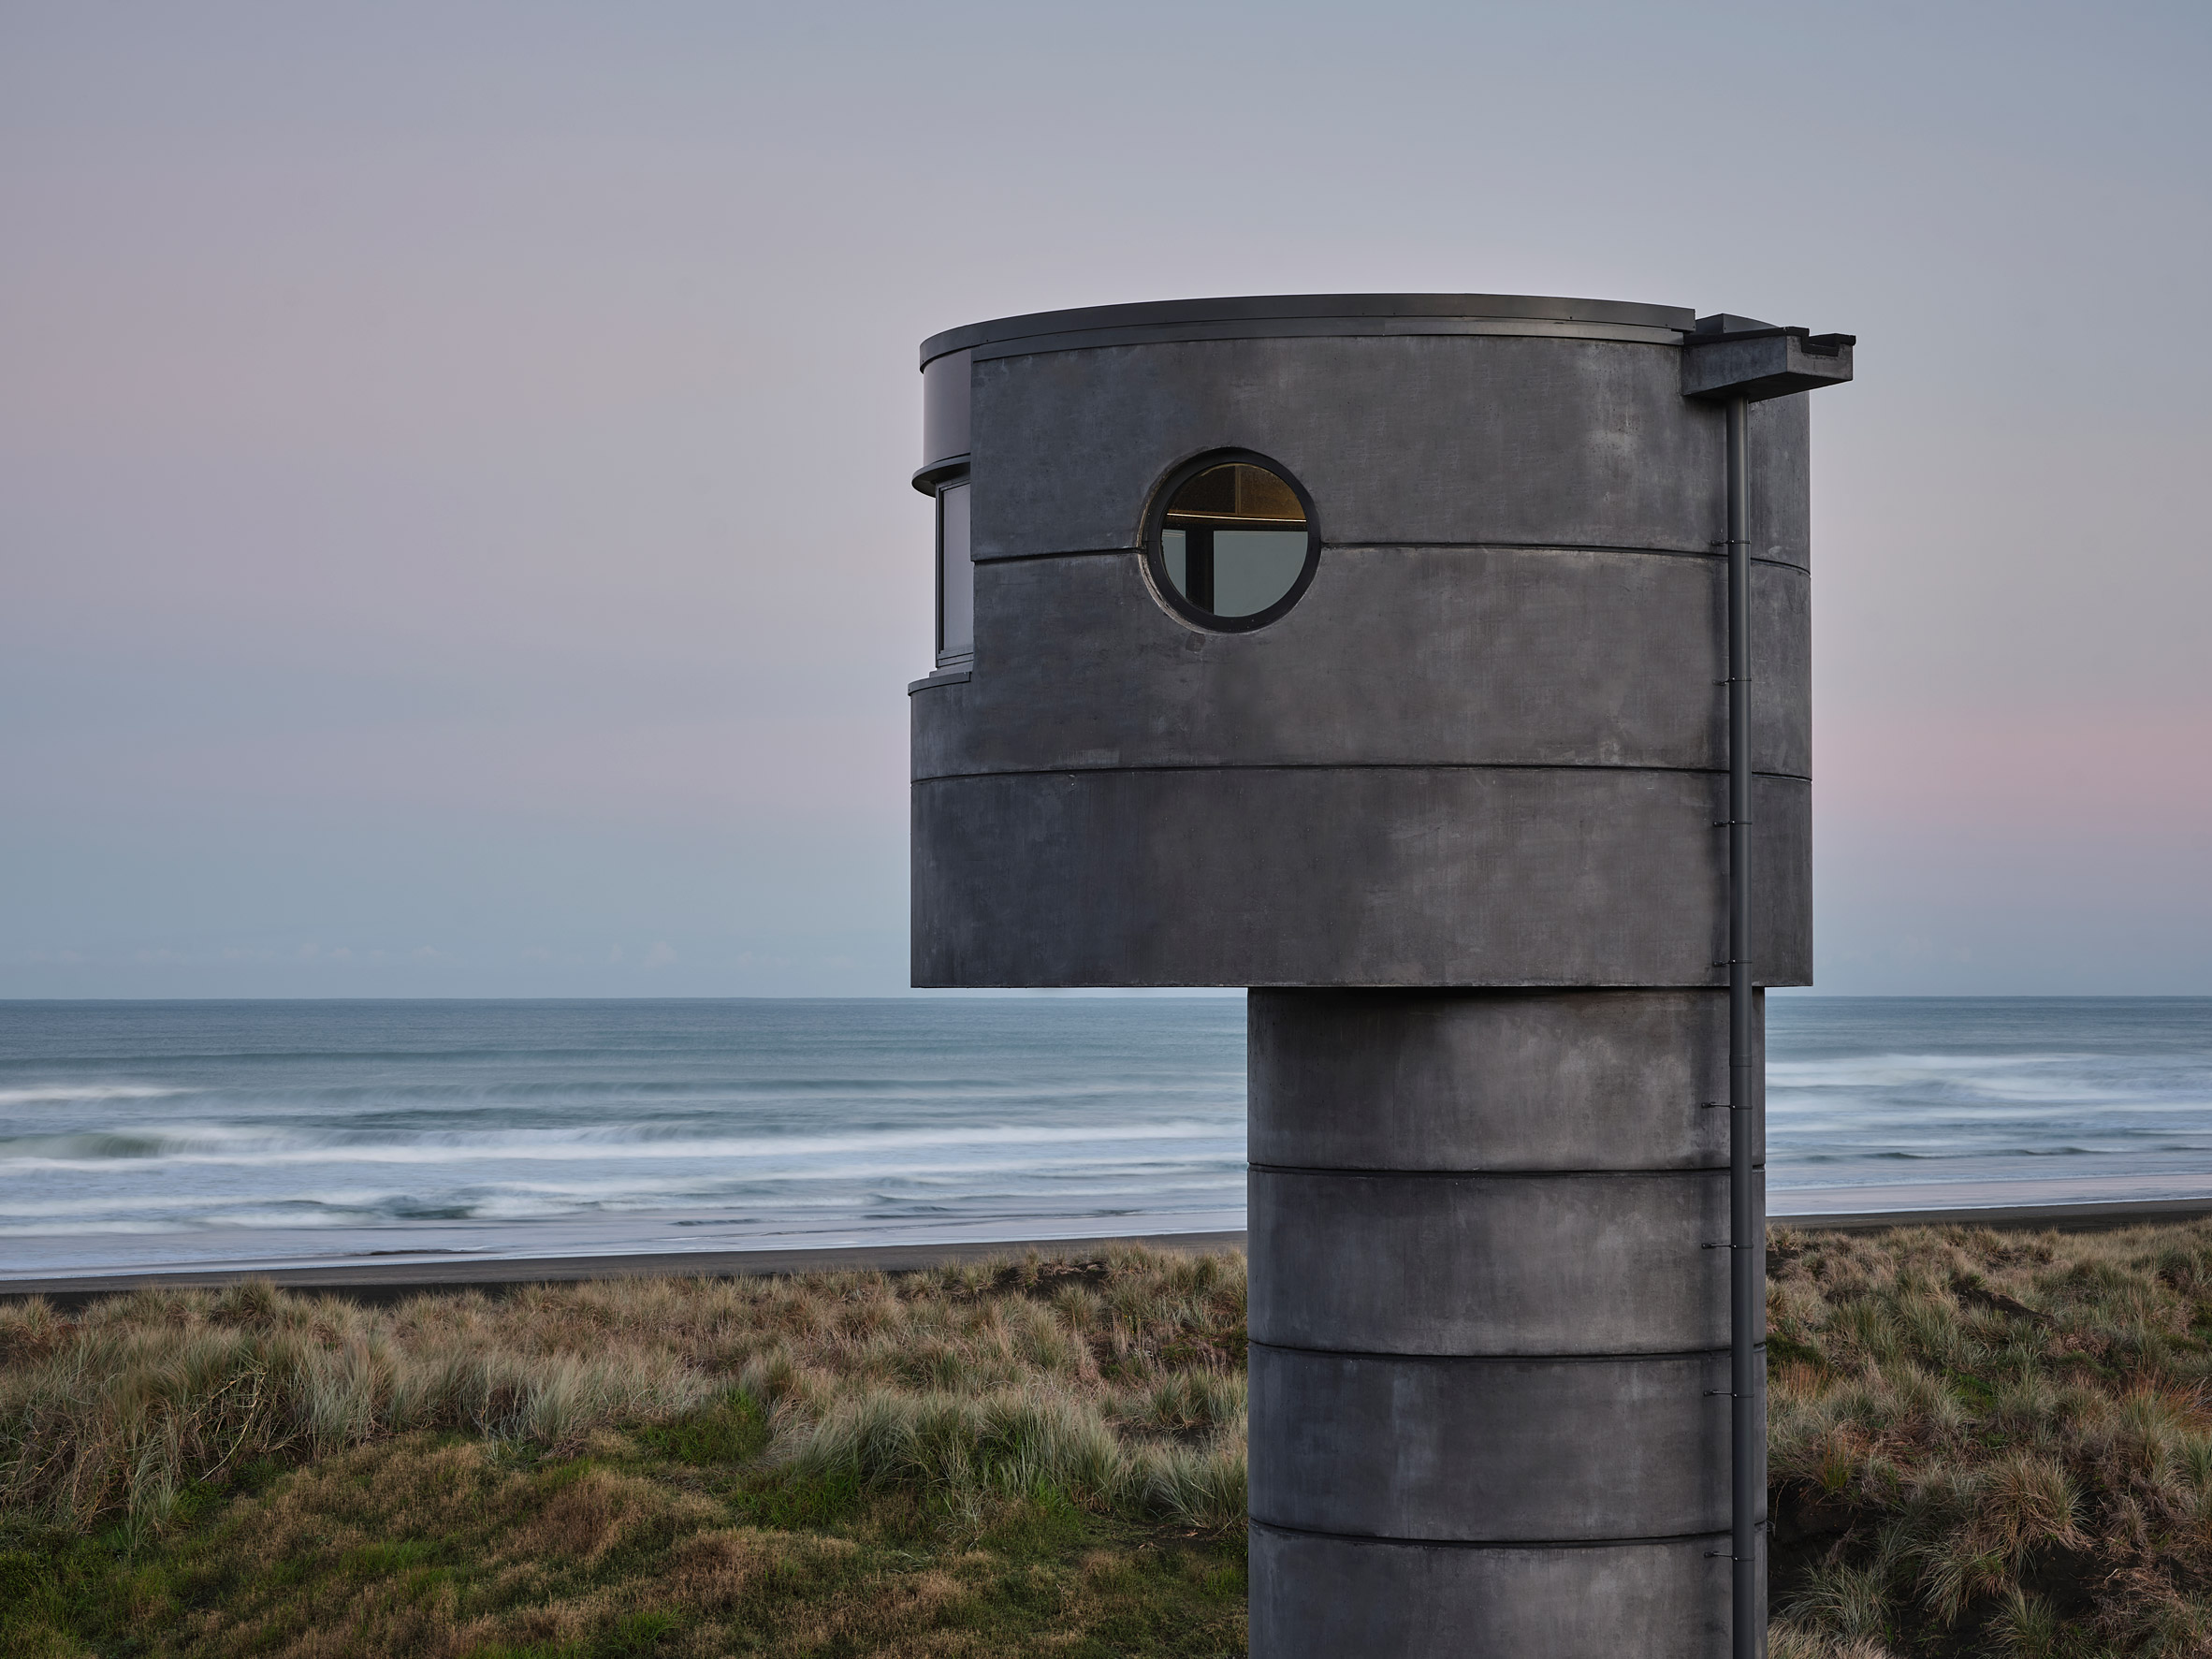 Lifeguard tower made from black concrete 